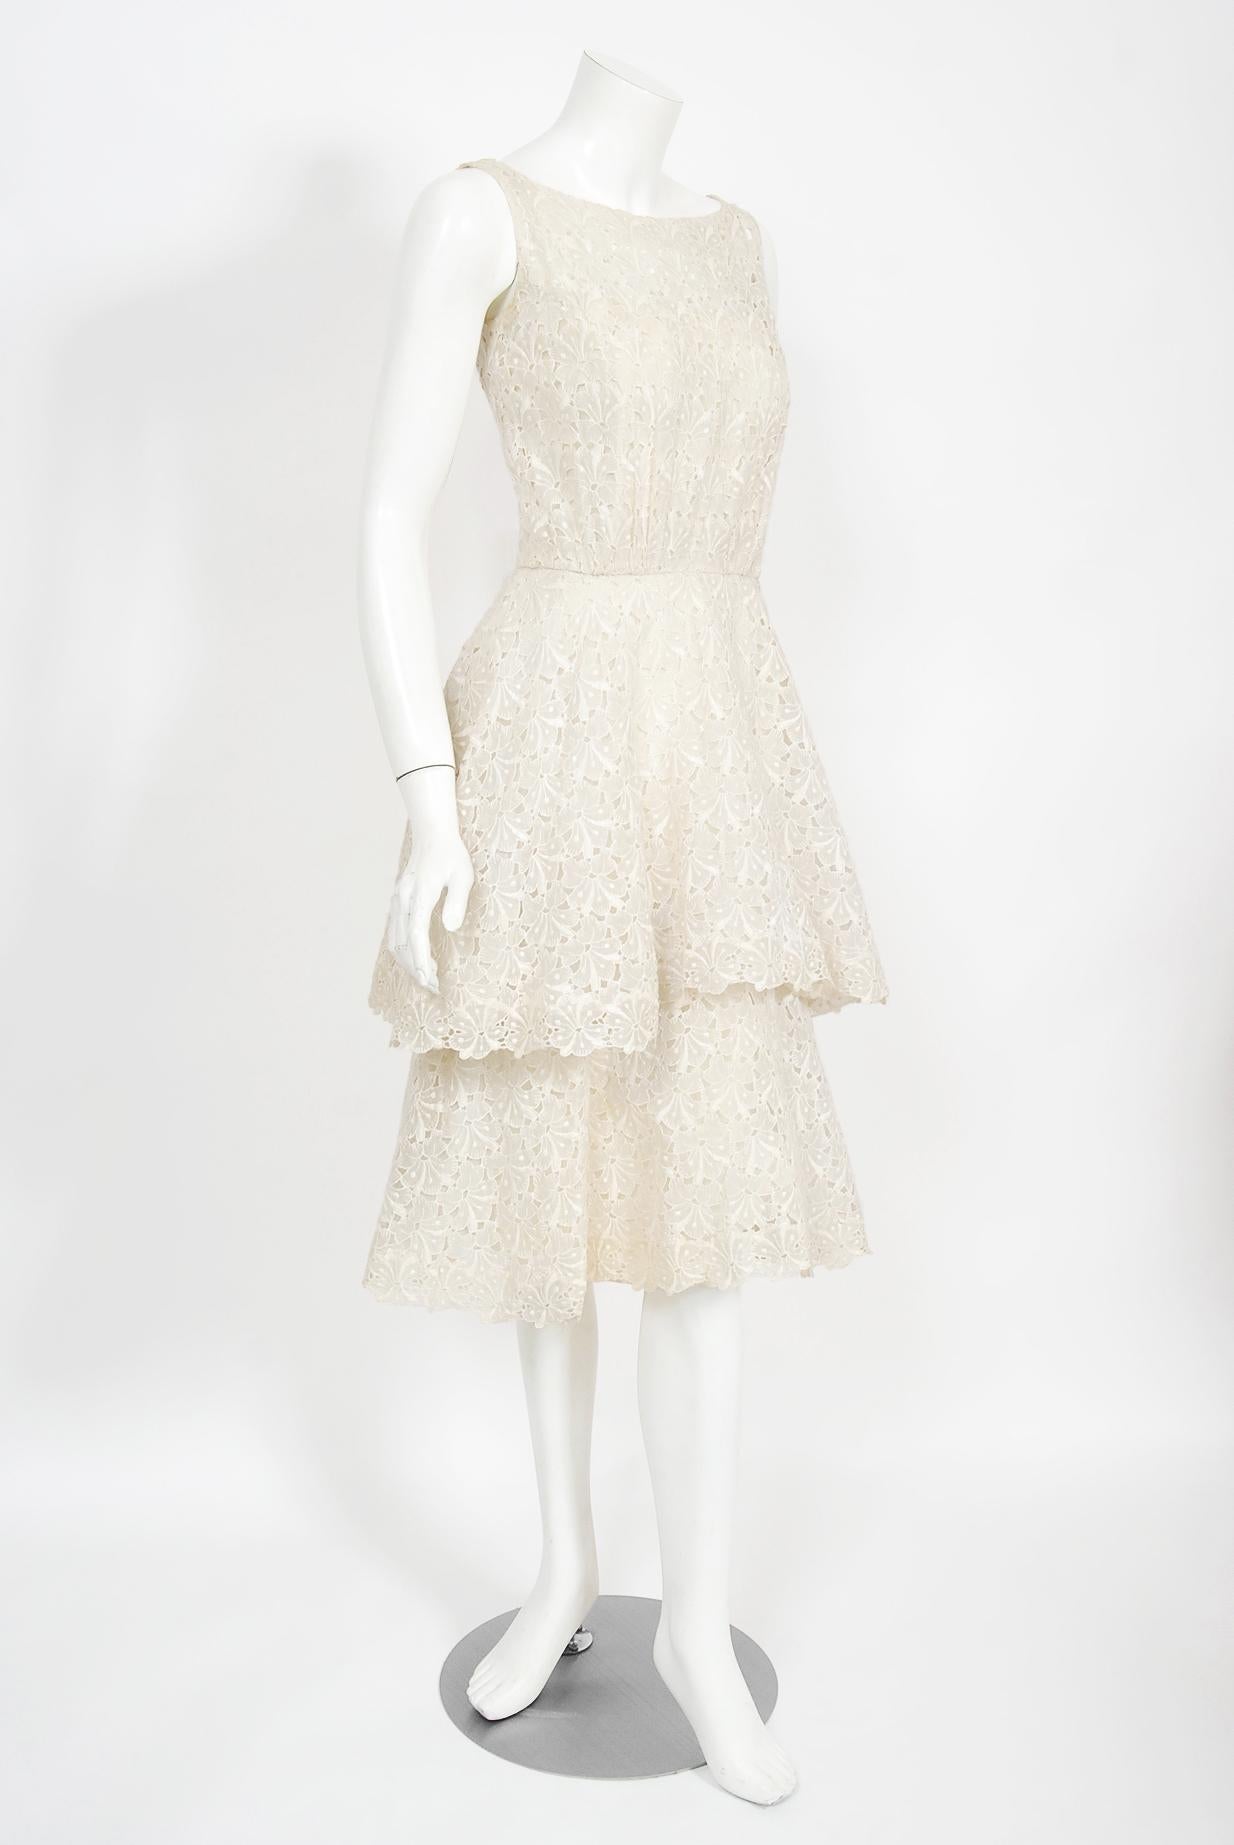 Vintage 1950's Ceil Chapman Ivory Embroidered Eyelet Cotton Tiered Bridal Dress For Sale 1